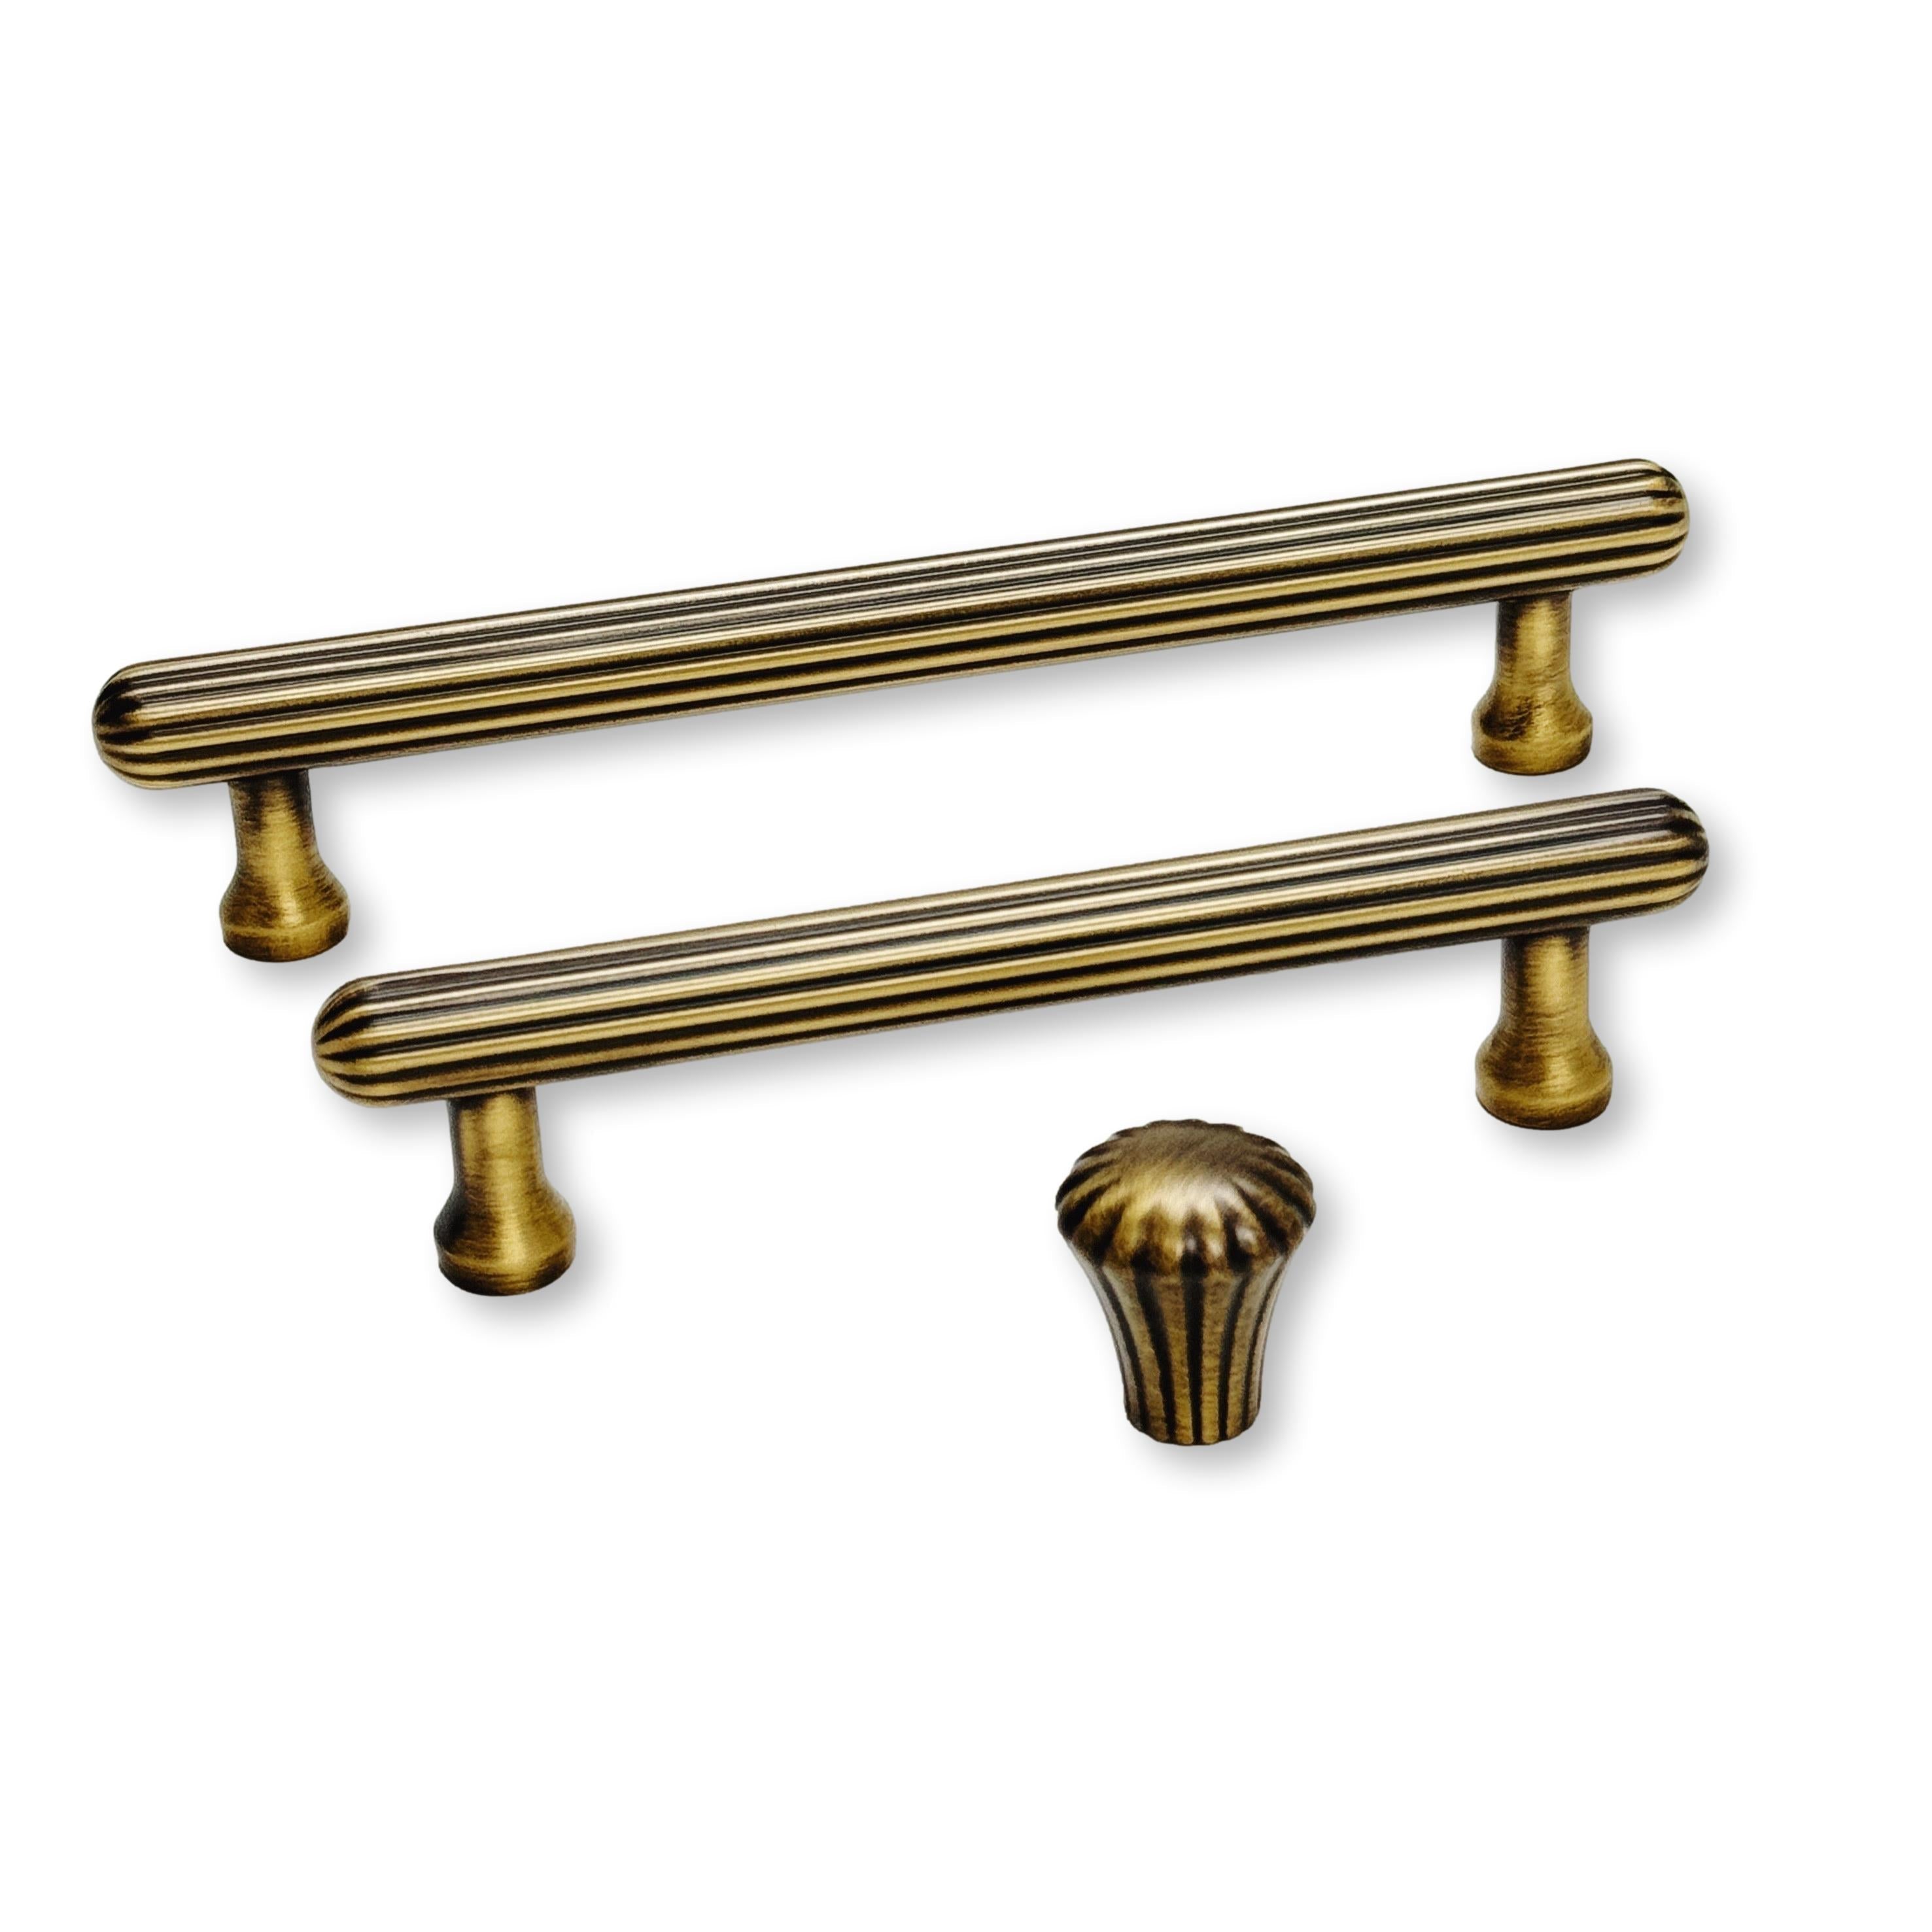 Fluted Antique Brass "Jewel" Ridge Cabinet Knobs and Pulls - Industry Hardware